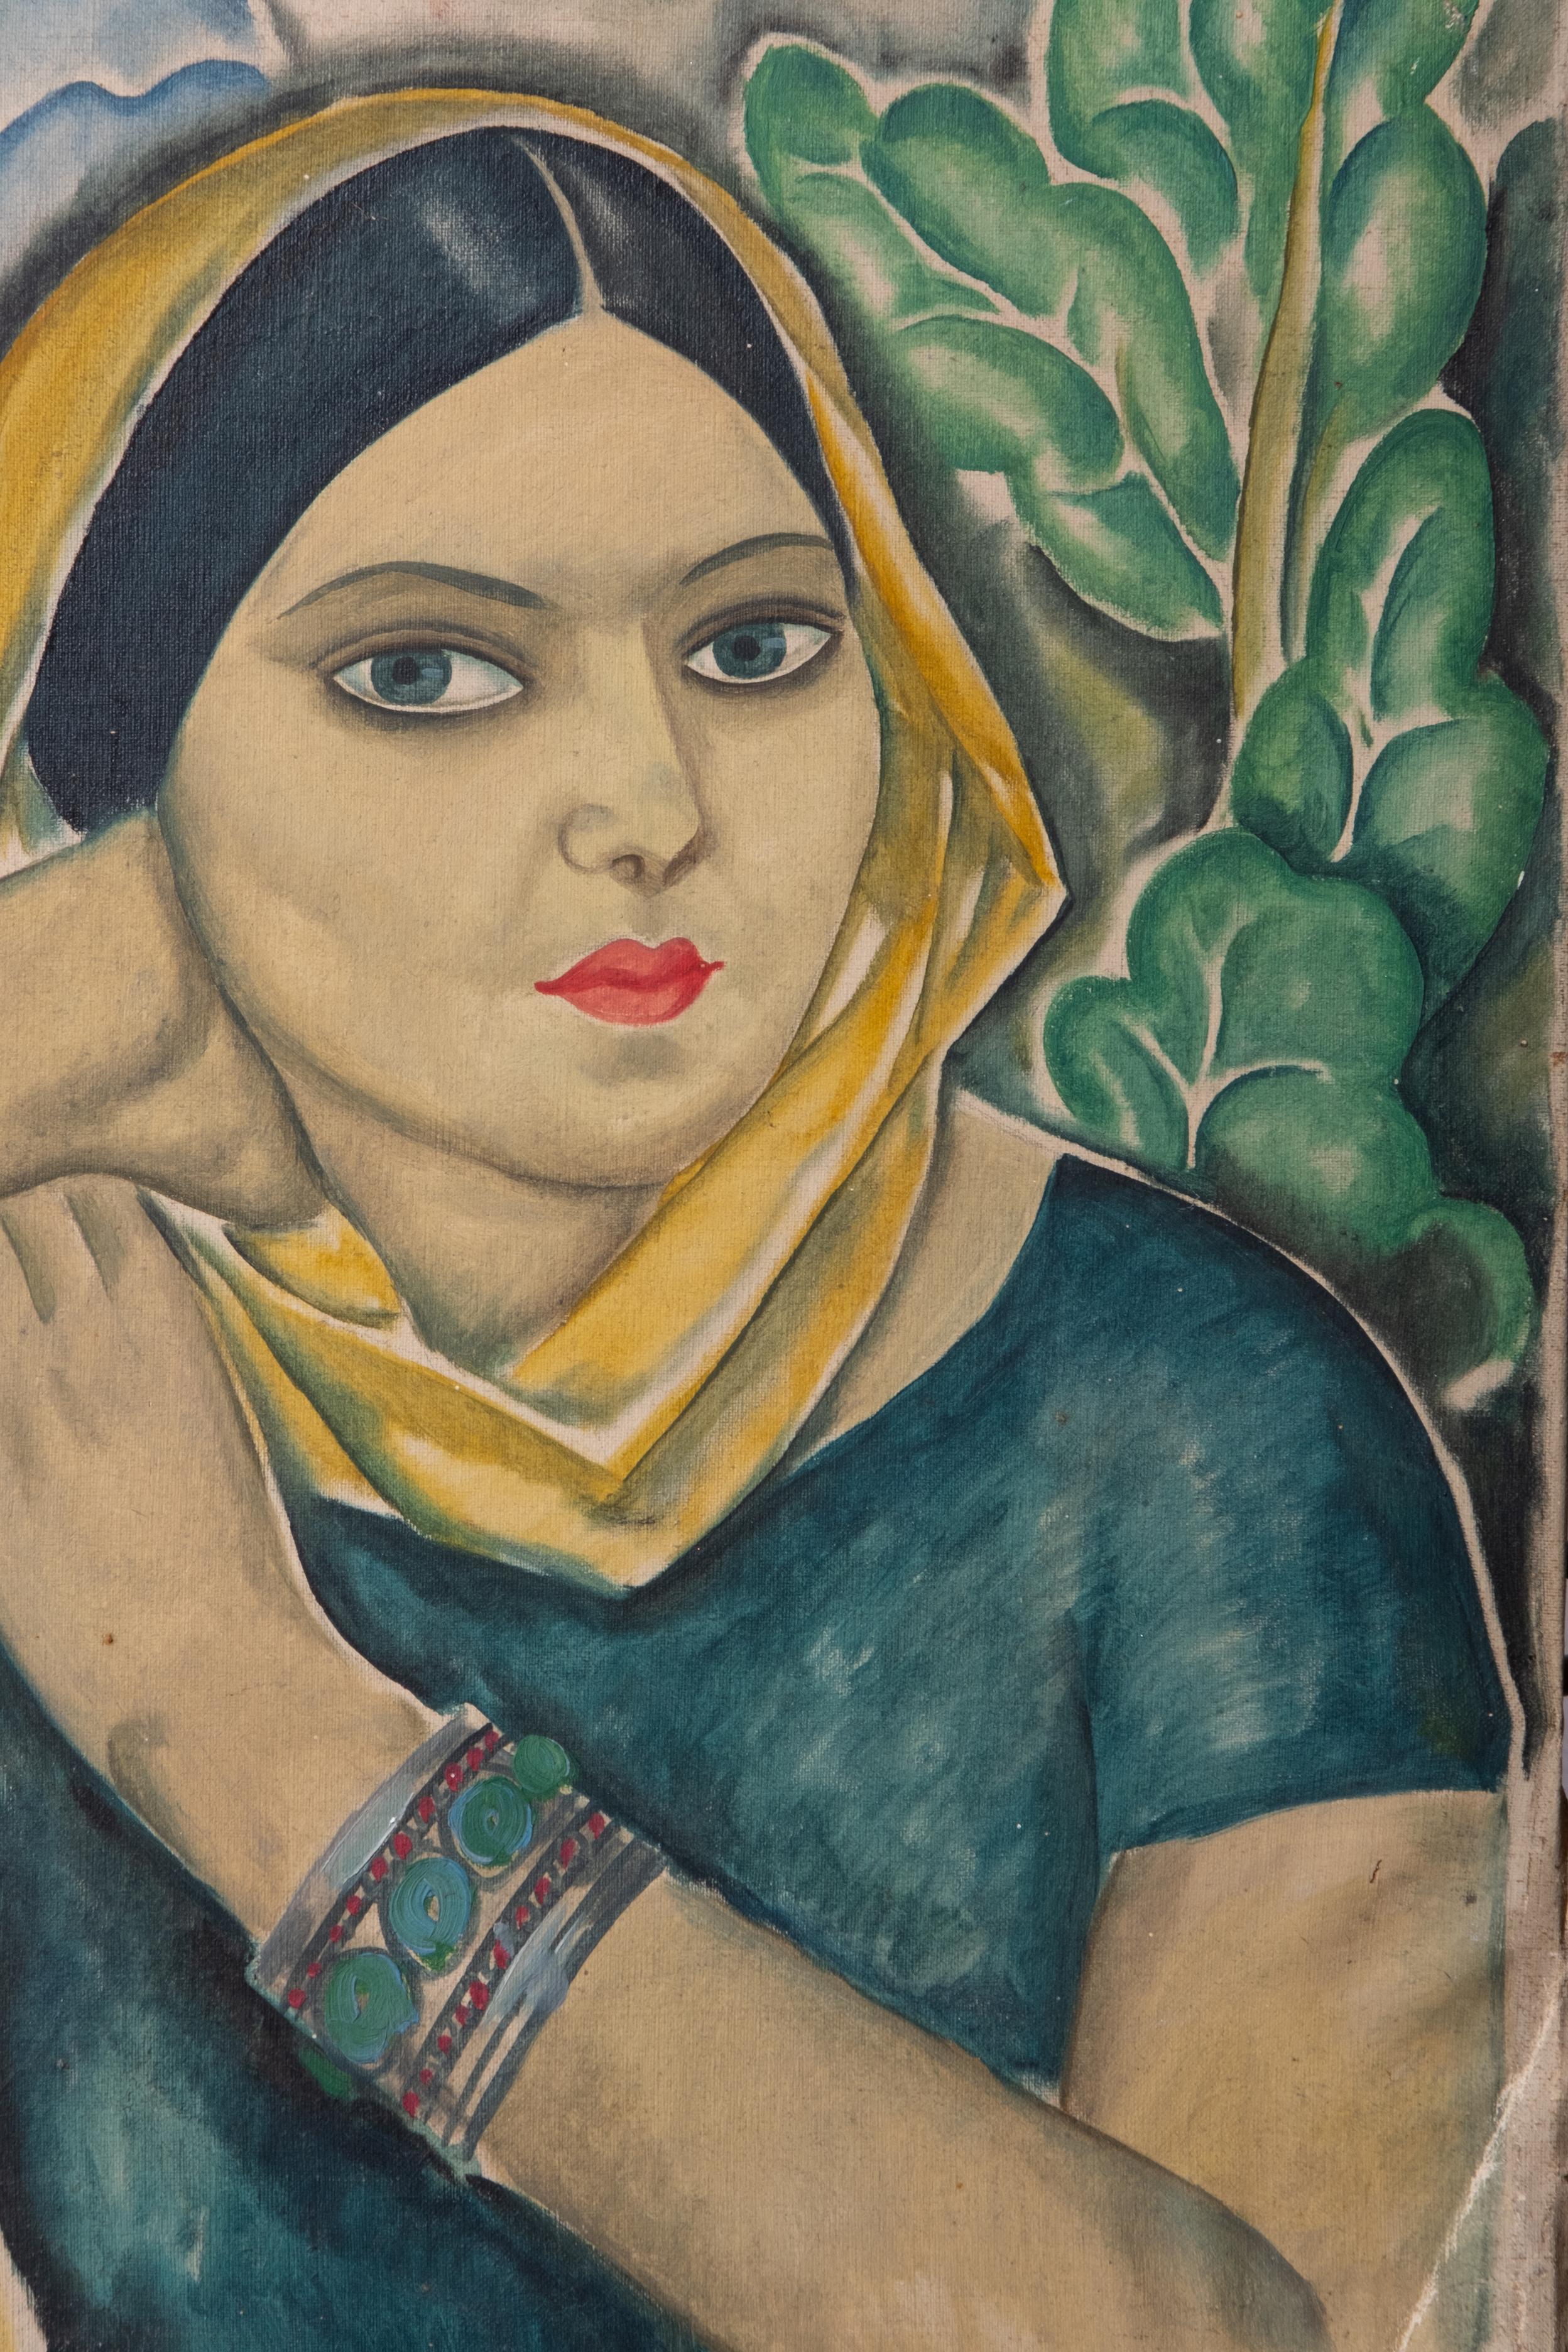 Hand-Painted Russian Avant-Garde Oil painting, early 20th century possibly Natalya Goncharova For Sale